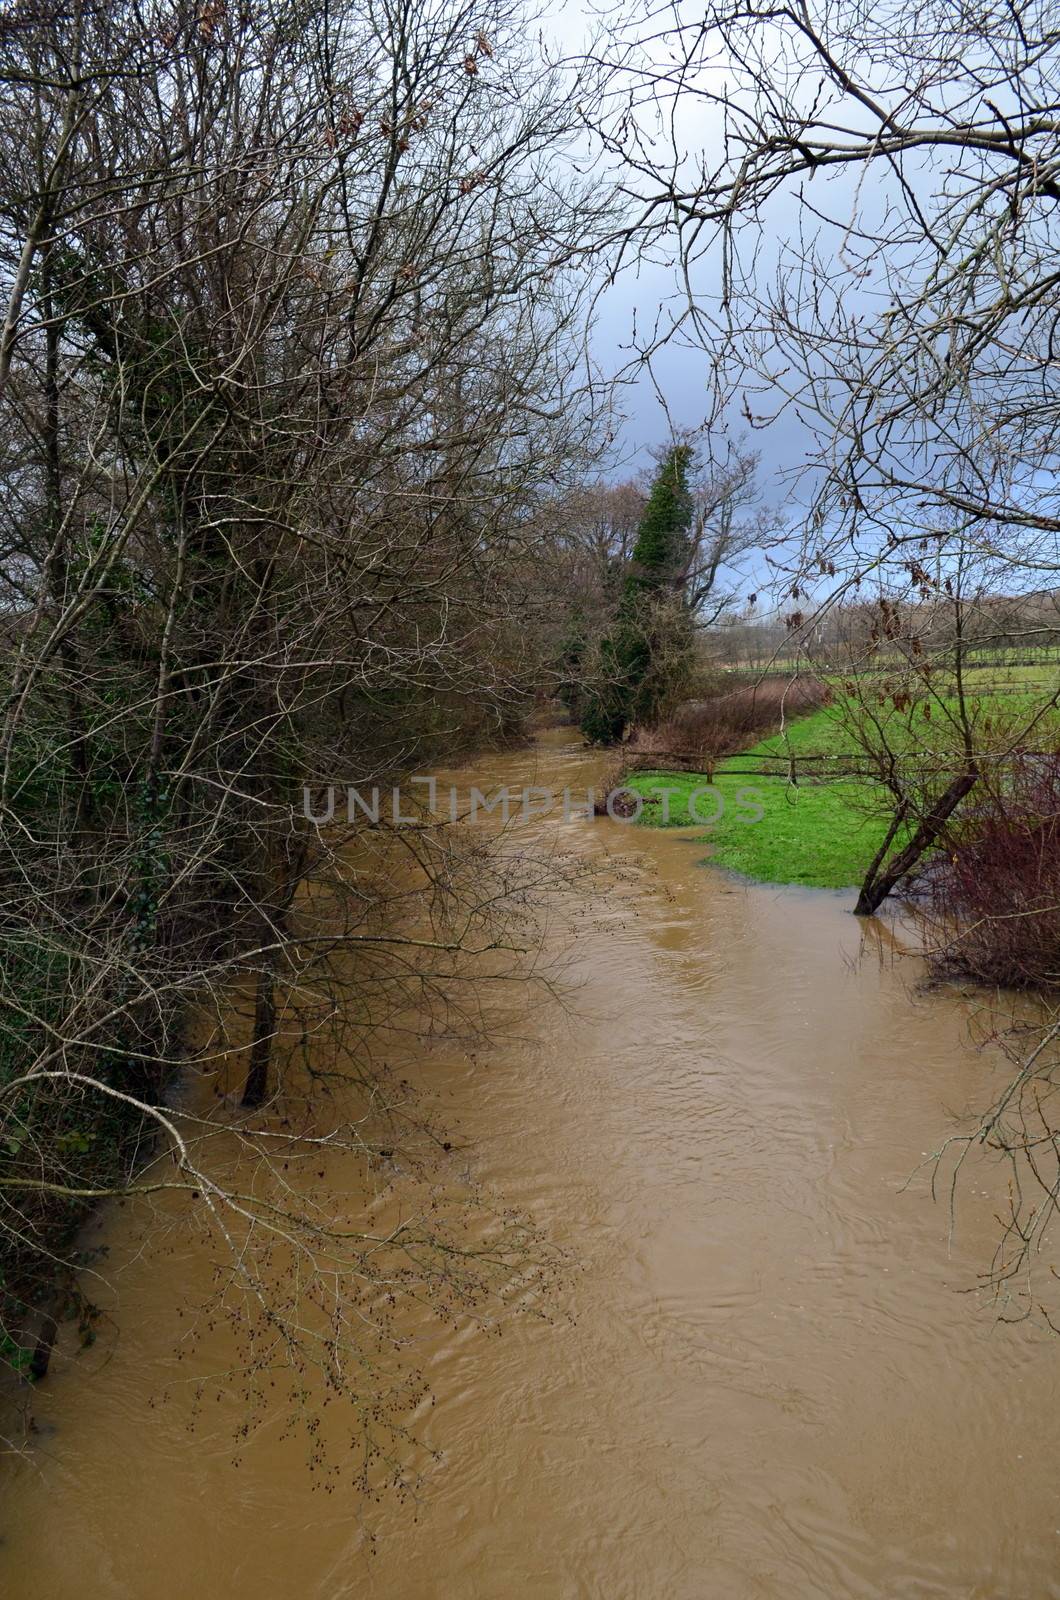 January 2014 and the UK experienced heavy rainfall which caused severe flooding around the Country. This stretch of the River Ouse in Sussex burst its banks and caused local flooding around Sheffield Park and surrounding villages.